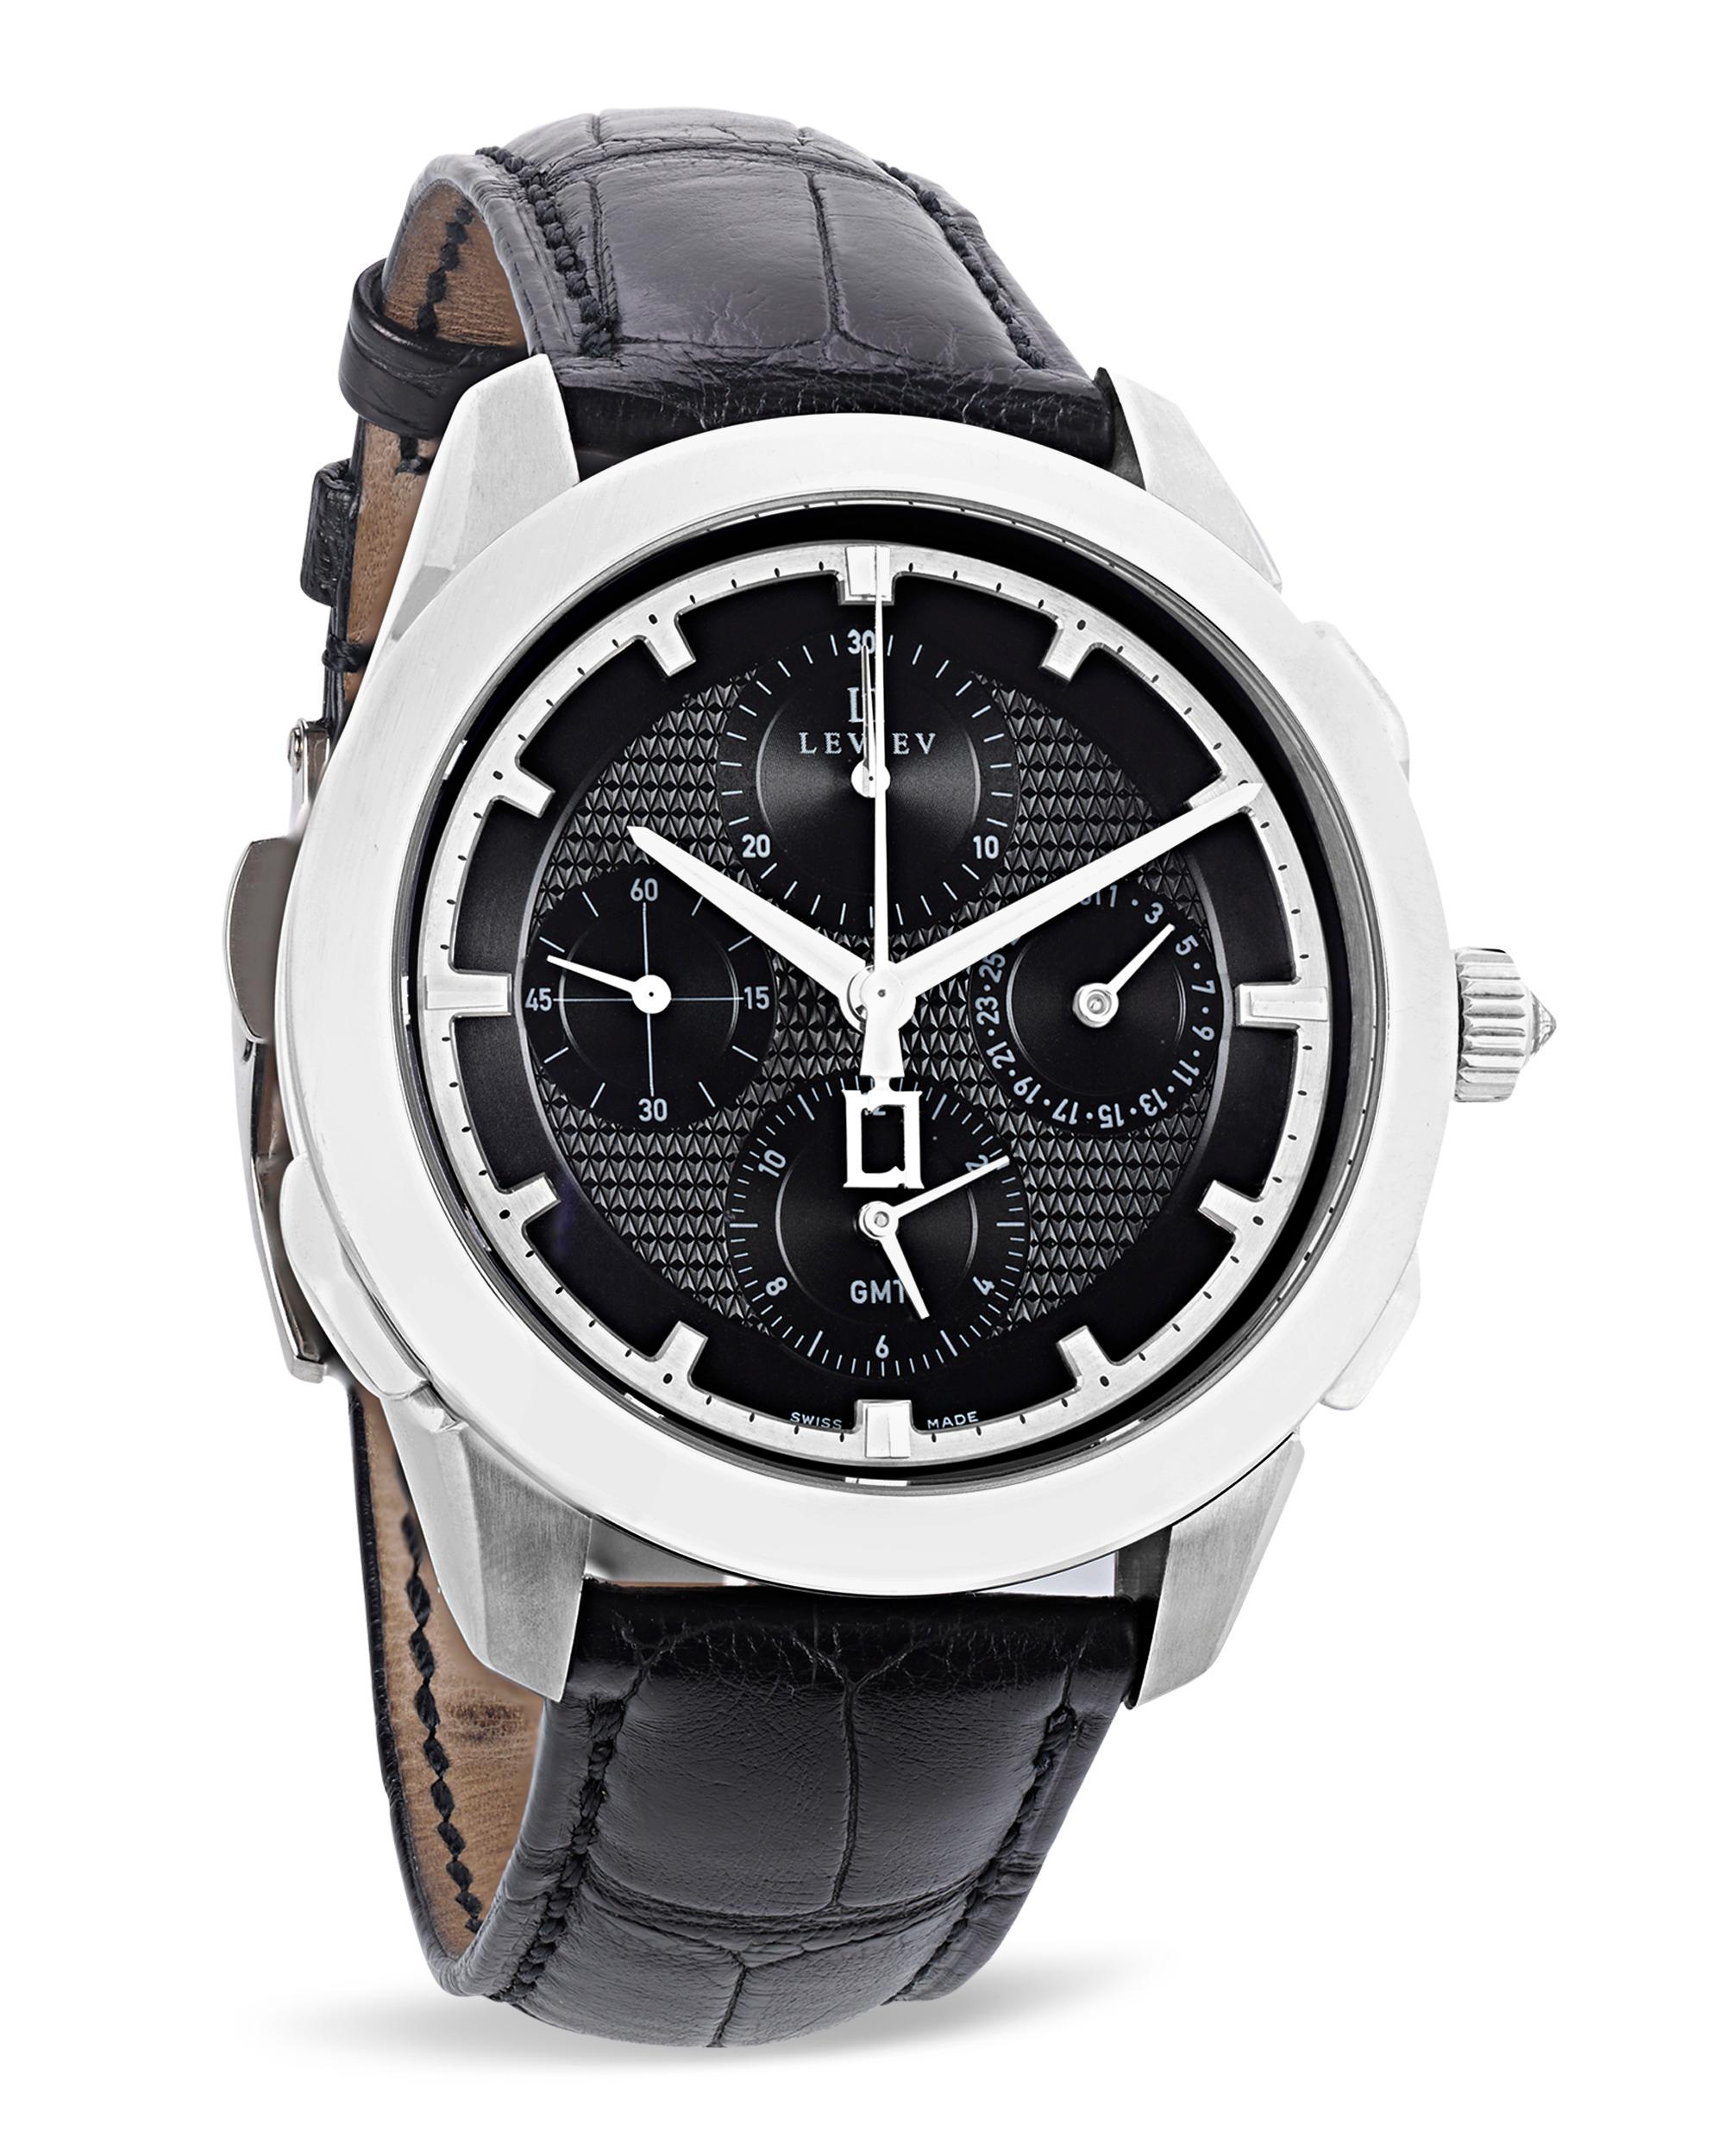 This stylish men's chronograph wristwatch by Leviev boasts a self-winding mechanical mechanism with complications by the famed Lajoux-Perret. The dial not only displays the hours, minutes, seconds and date, but also features a second time zone and a